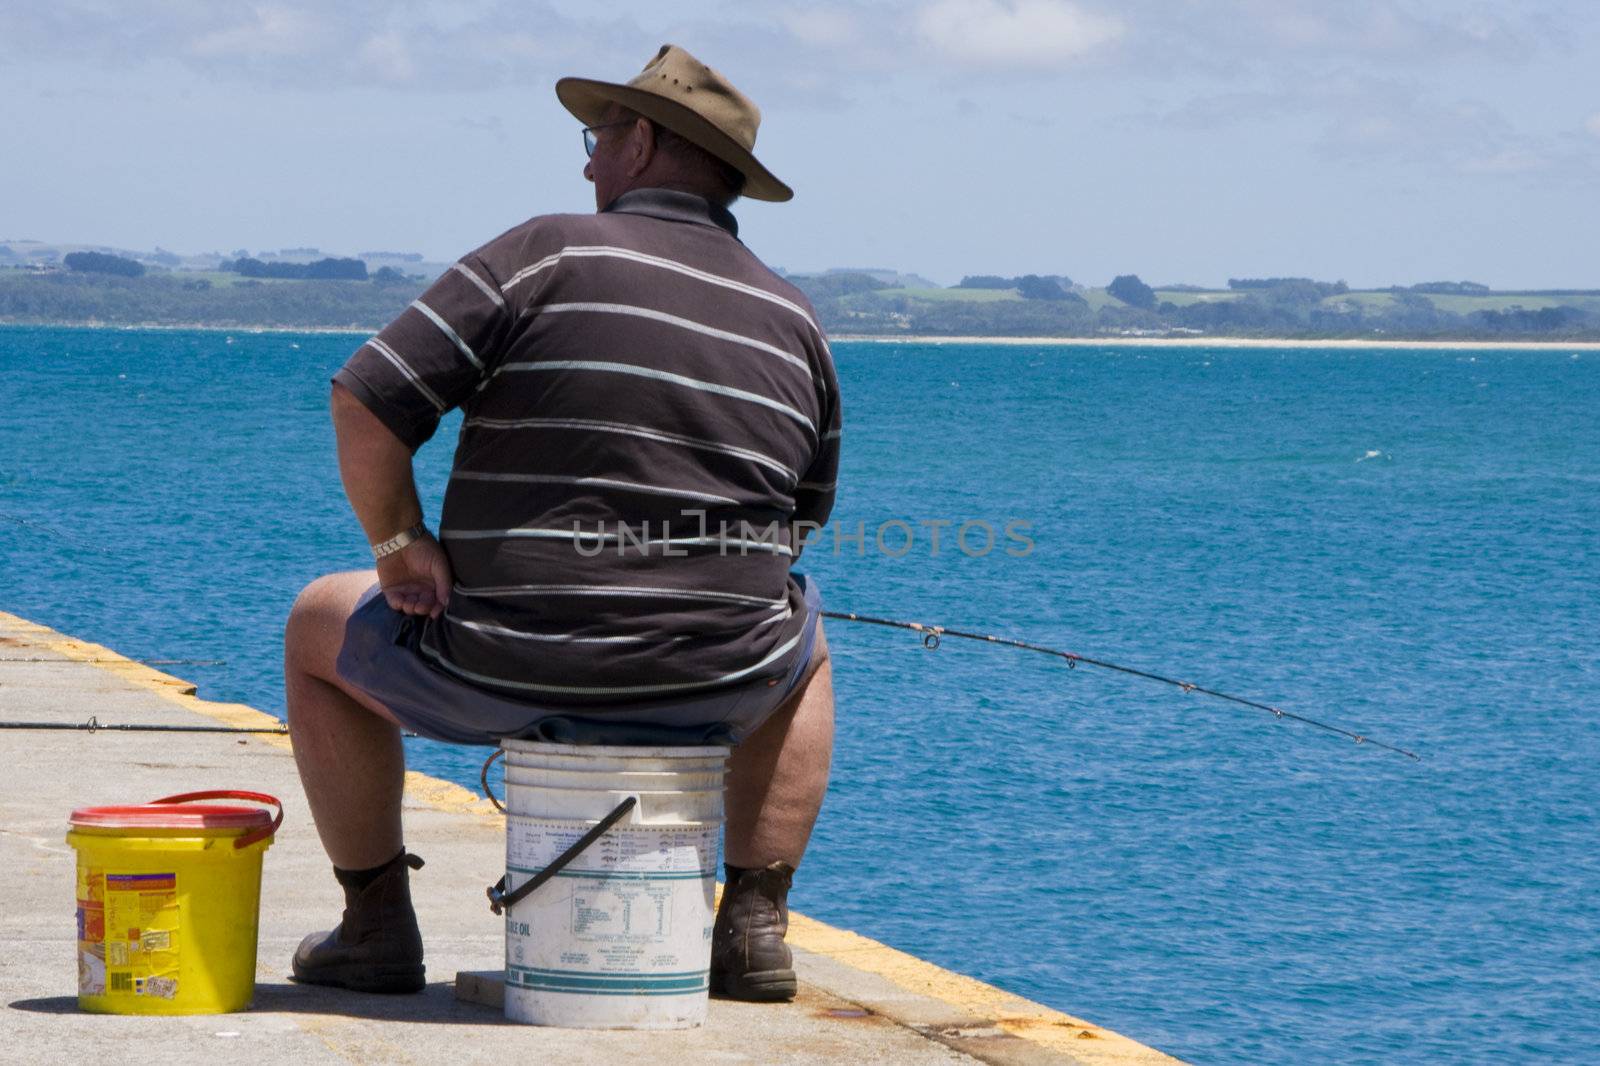 Sunny day in Tasmania's North-West: a lonely fisherman uses his bucket with bait while waiting for the fish to bite.